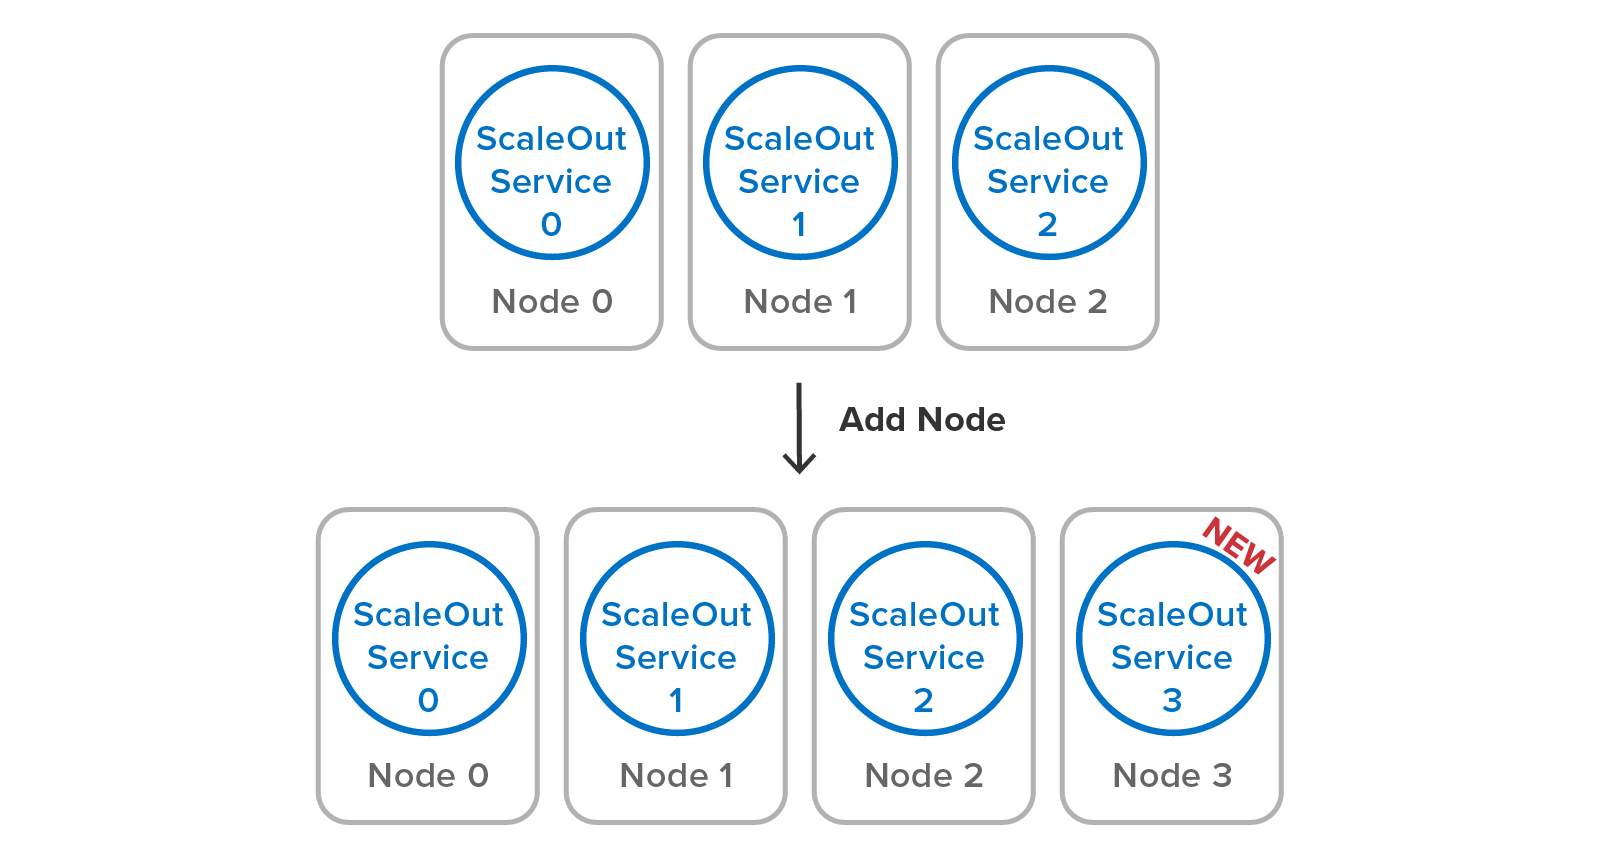 Adding a server to a cluster just requires starting up a single service process on a new server.